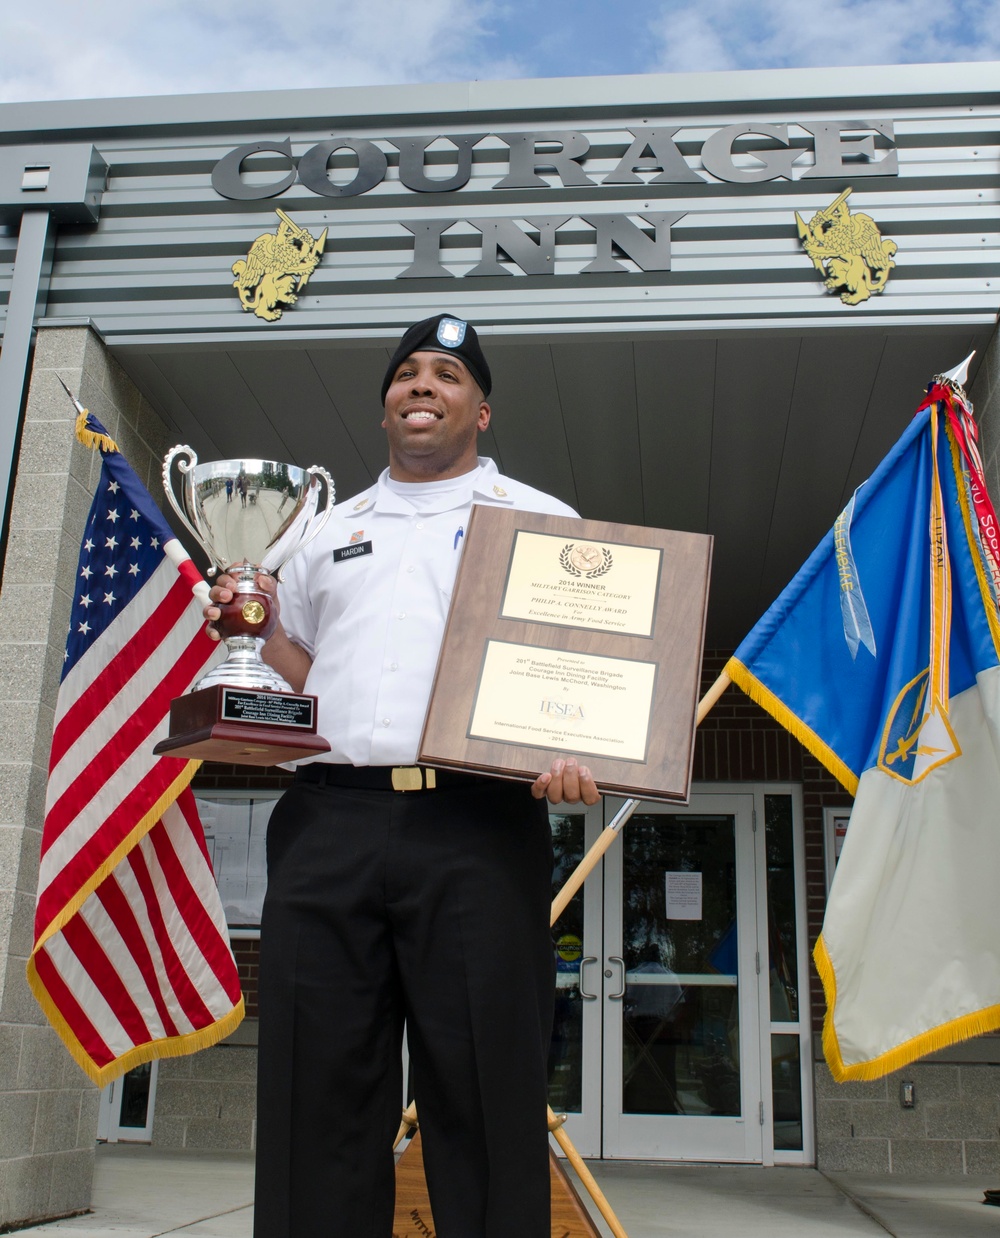 JBLM Dining Facility Best in the Army